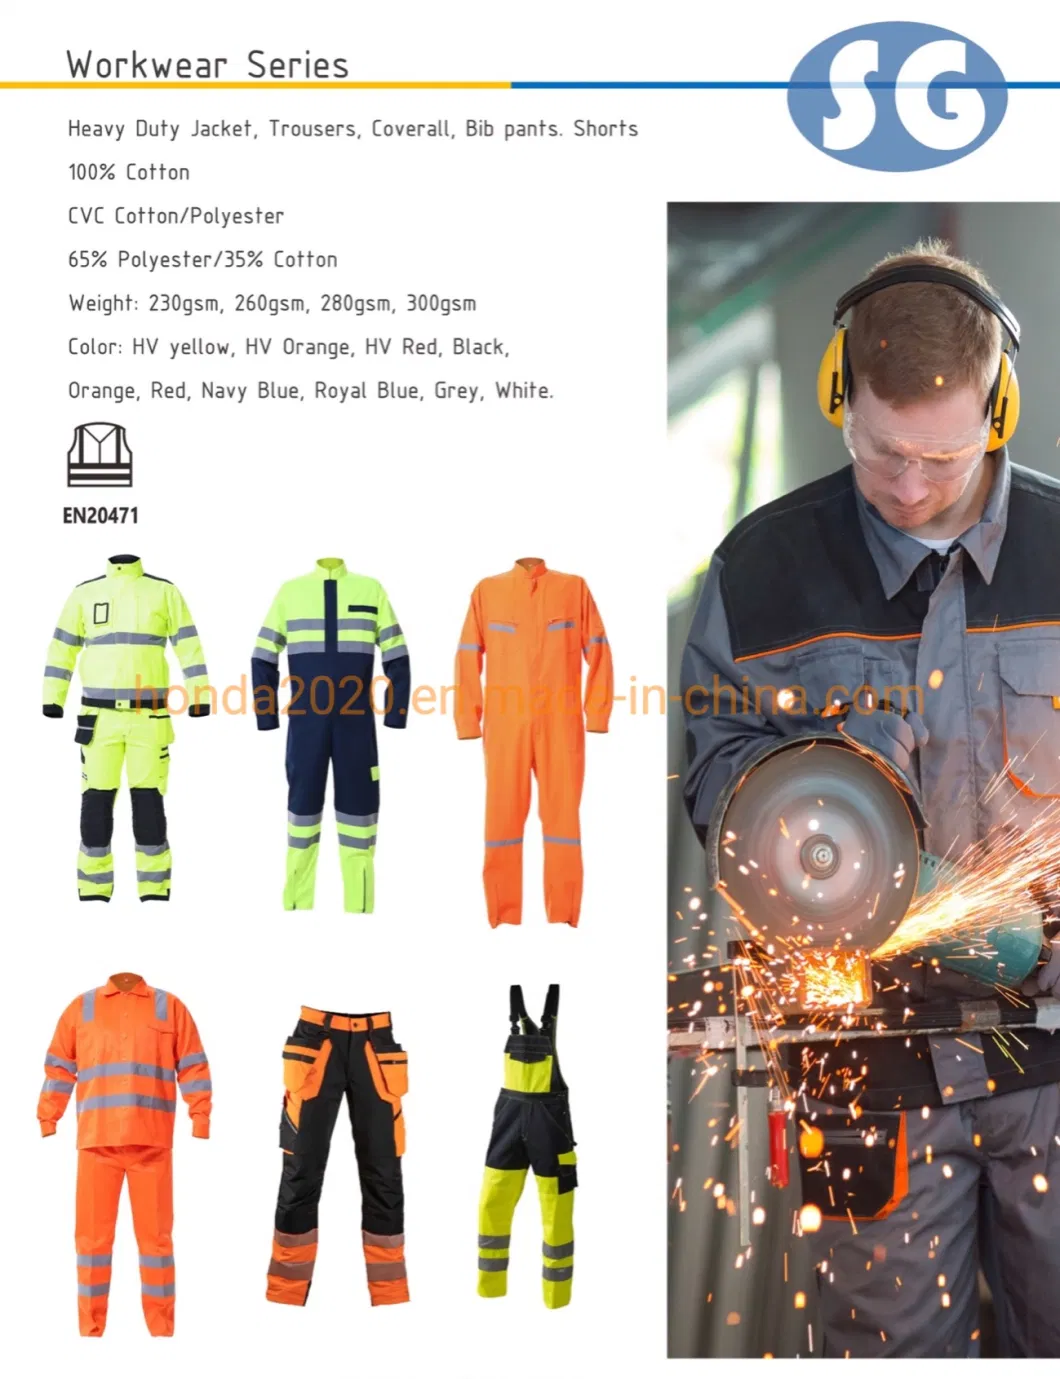 Classic Waterproof, Outdoor, Windproof Breathable Man High Visibility Reflective Popular Winter Safety Jacket Work Wear